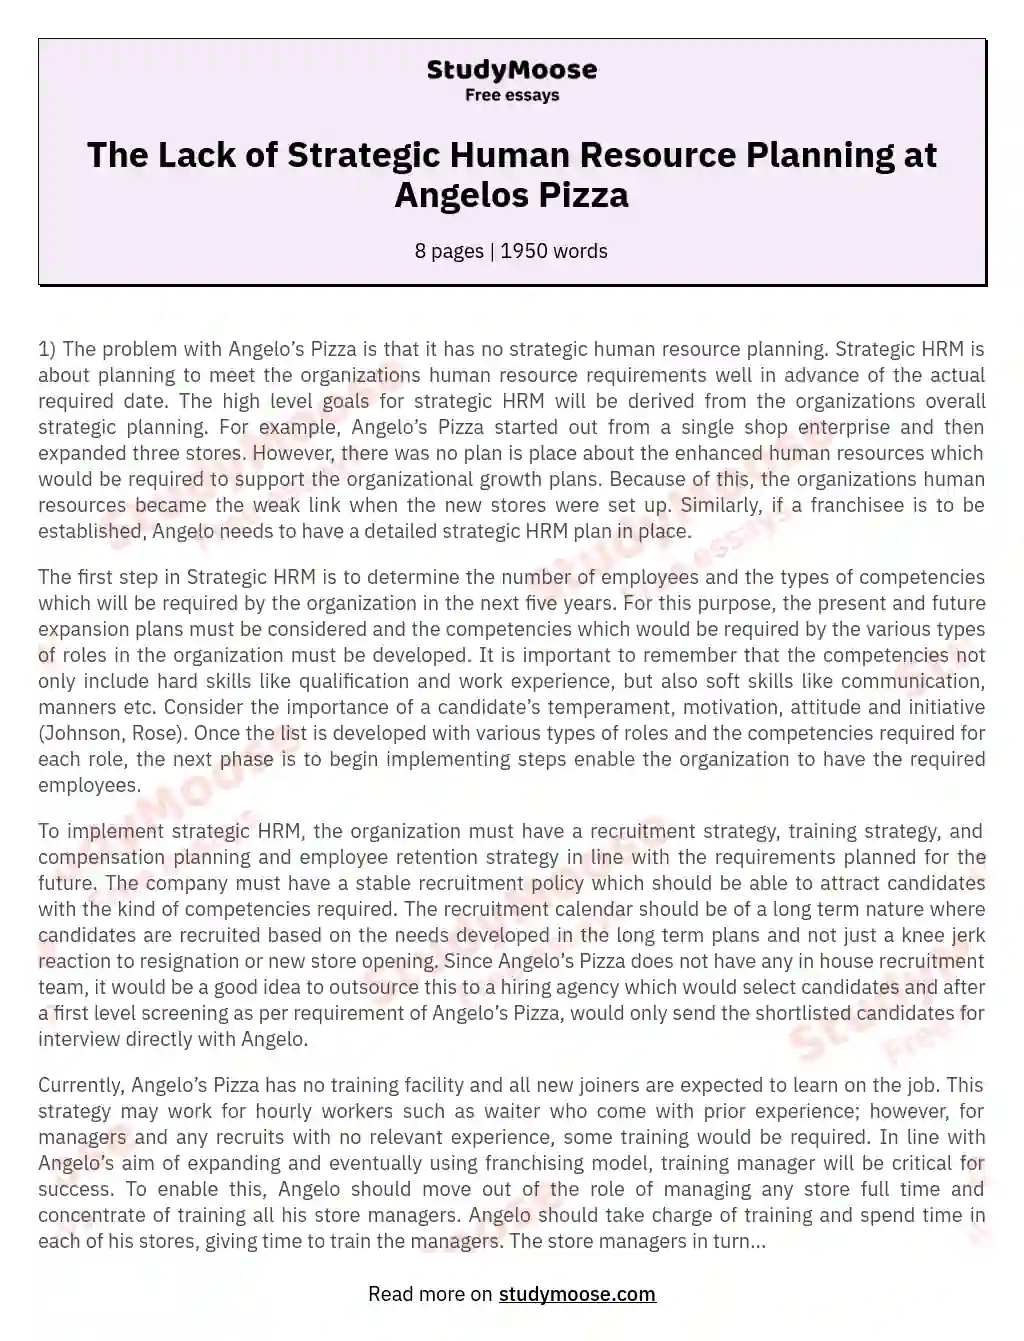 The Lack of Strategic Human Resource Planning at Angelos Pizza essay